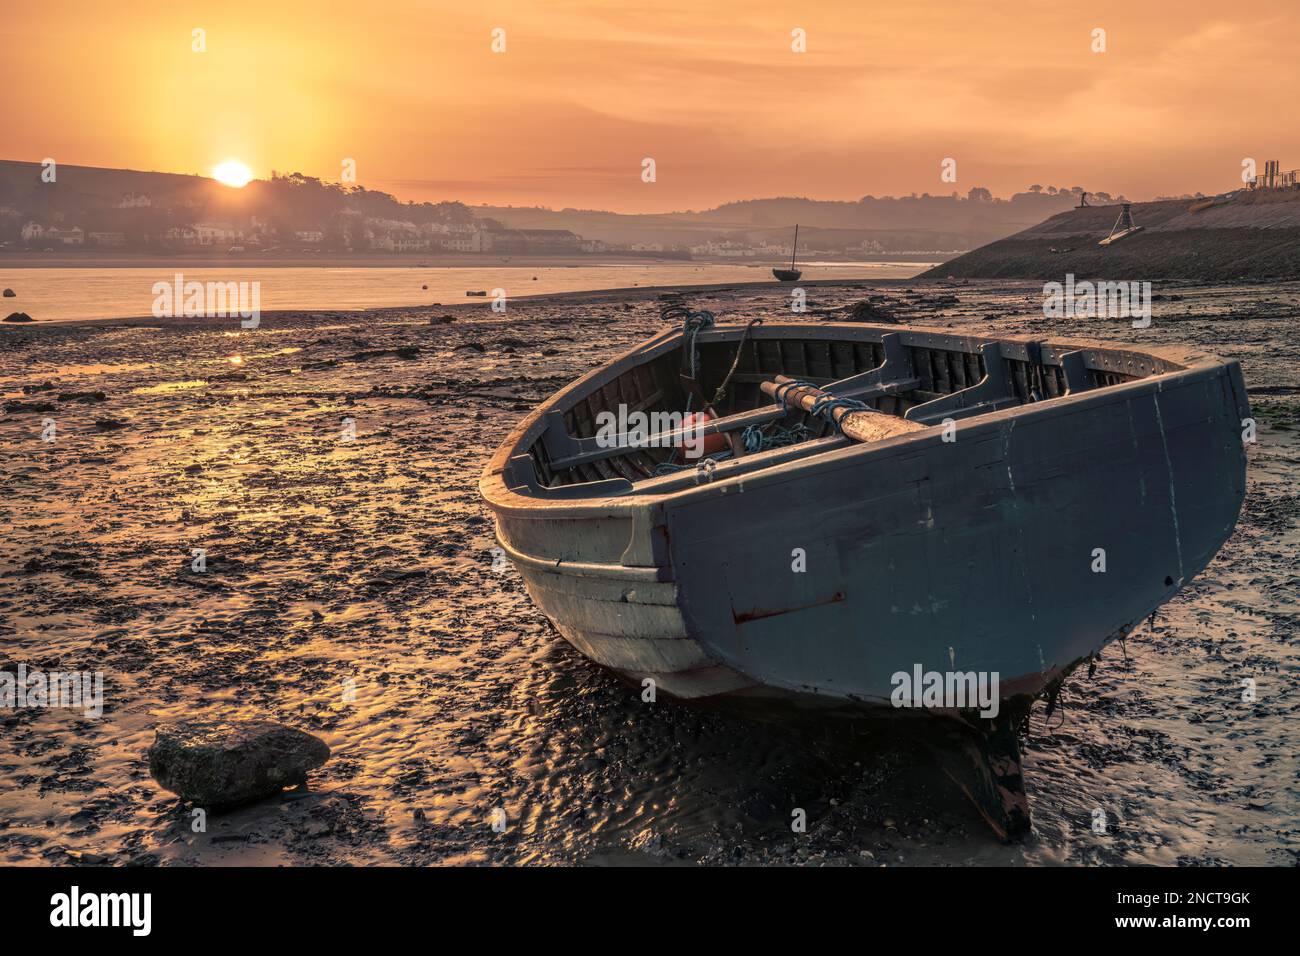 Wednesday 15th February 2023. After several days of mild weather, the North Devon coastal villages of Instow and Appledore wake up to a colder start to the day, as the cloud builds up over the River Torridge estuary and rain is forecast for the latter part of the week. Credit: Terry Mathews/Alamy Live News Stock Photo